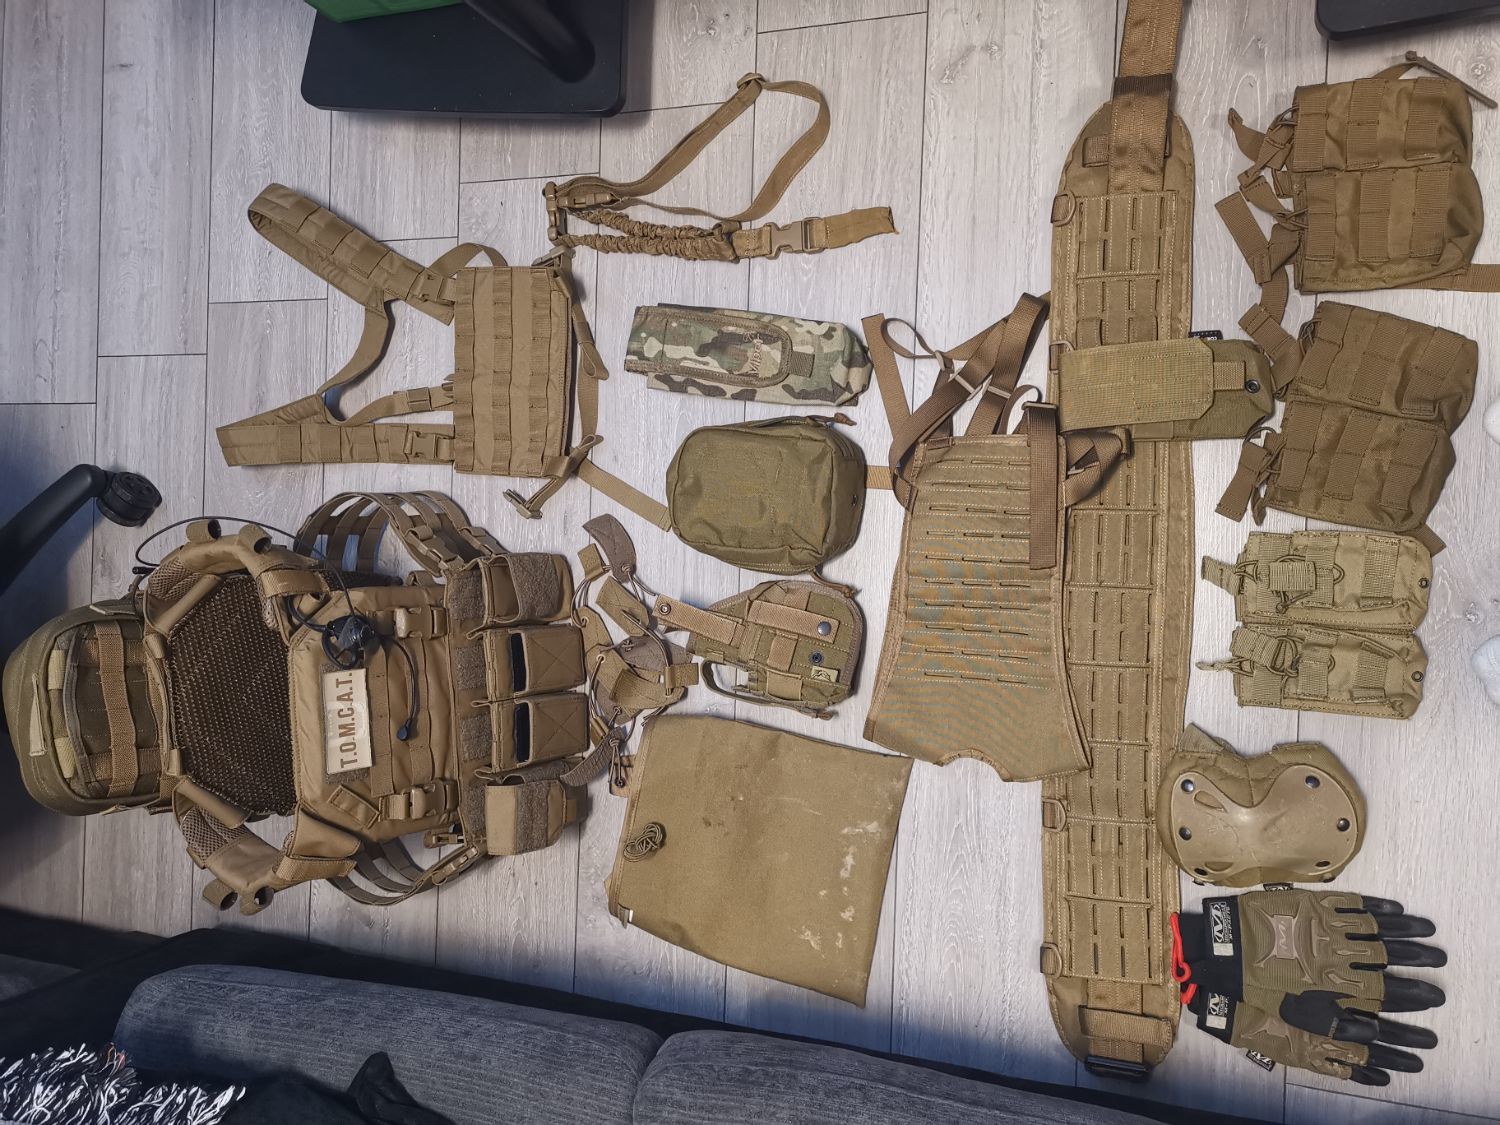 Warrior Recon Plate Carrier - With many extras - Gear - Airsoft Forums UK